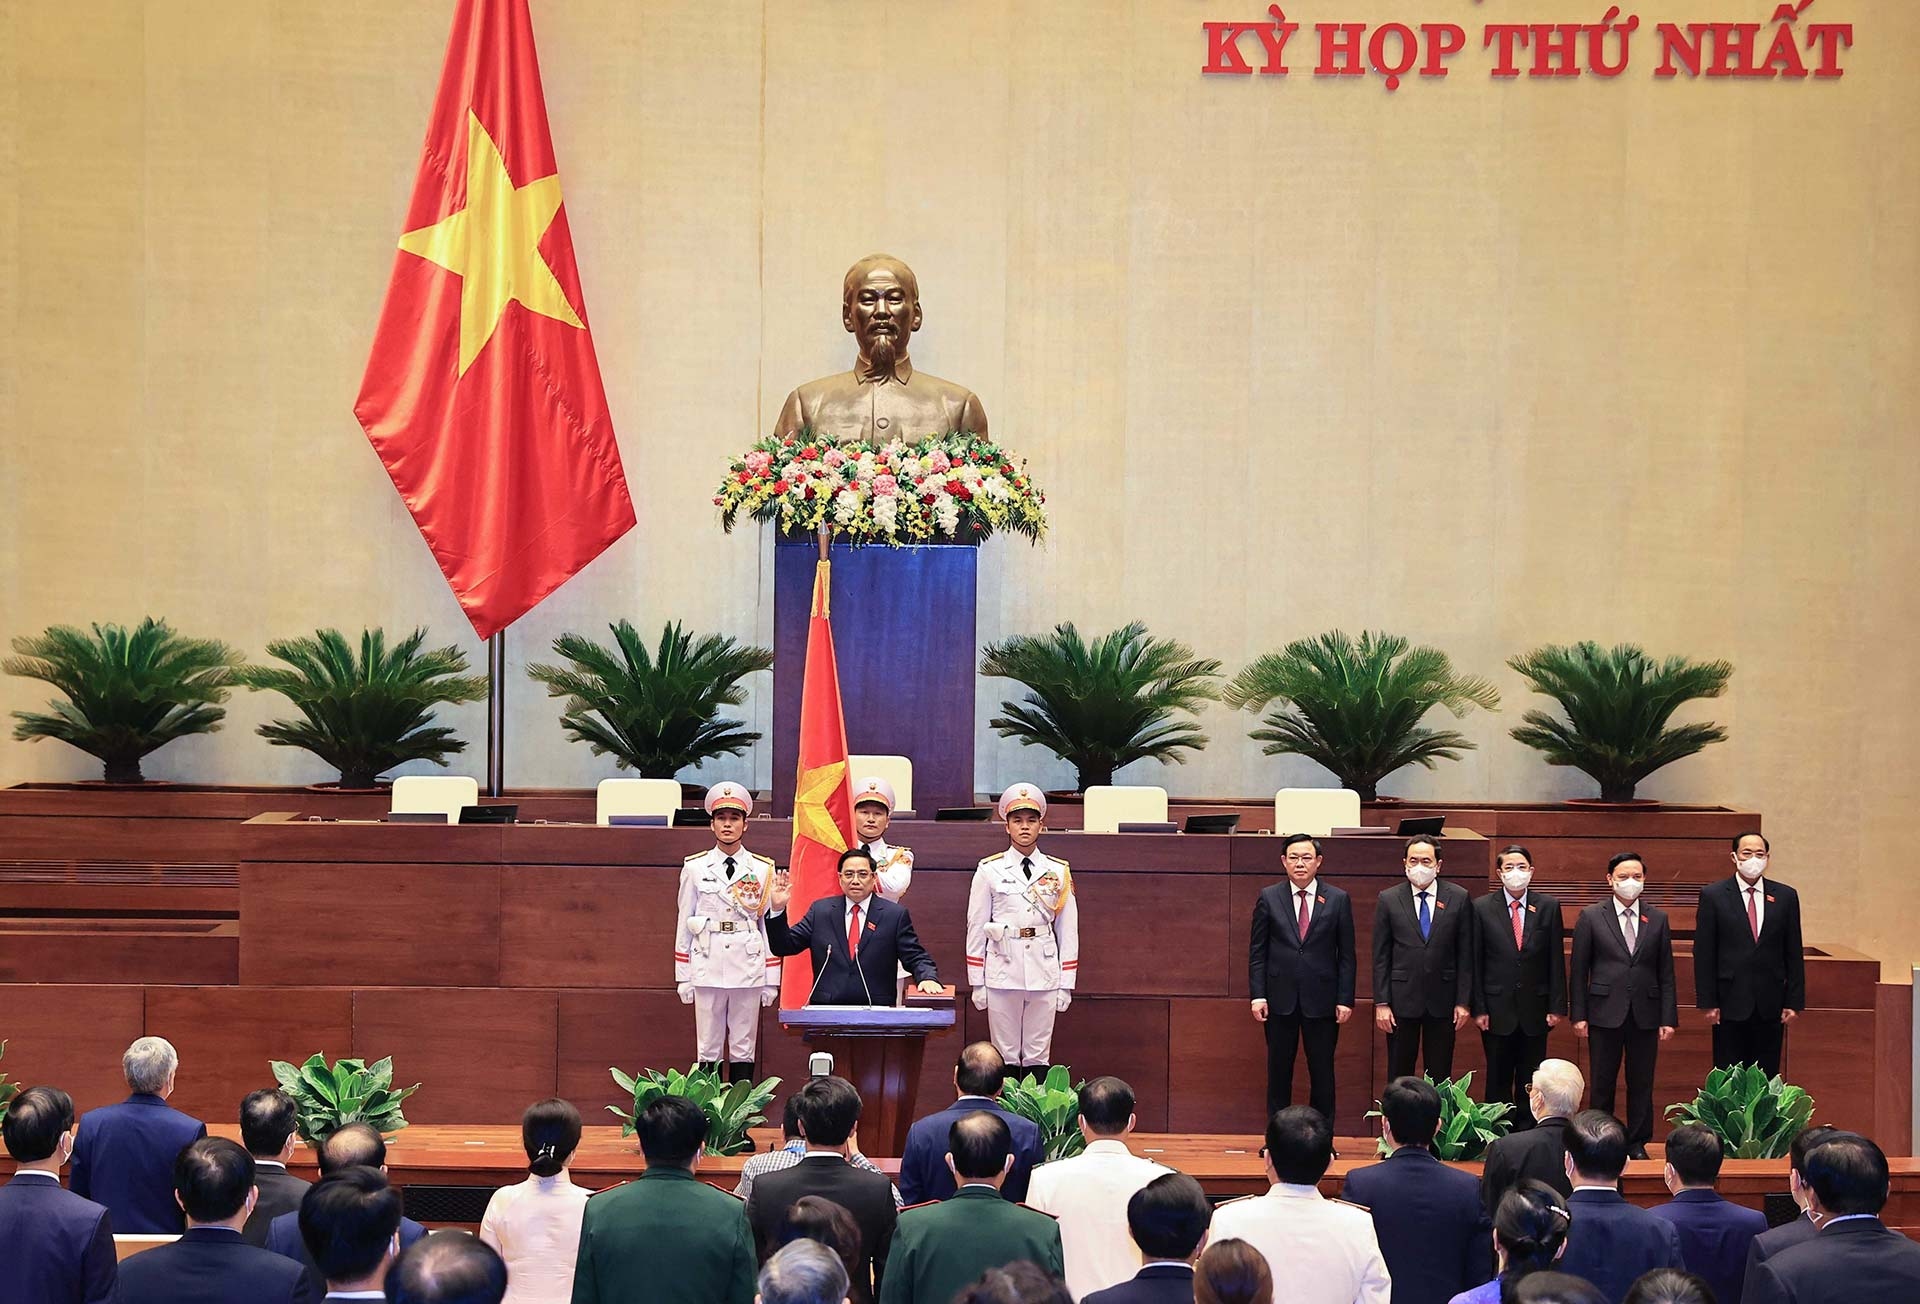 Pham Minh Chinh re-elected as Prime Minister for 2021-2026 tenure